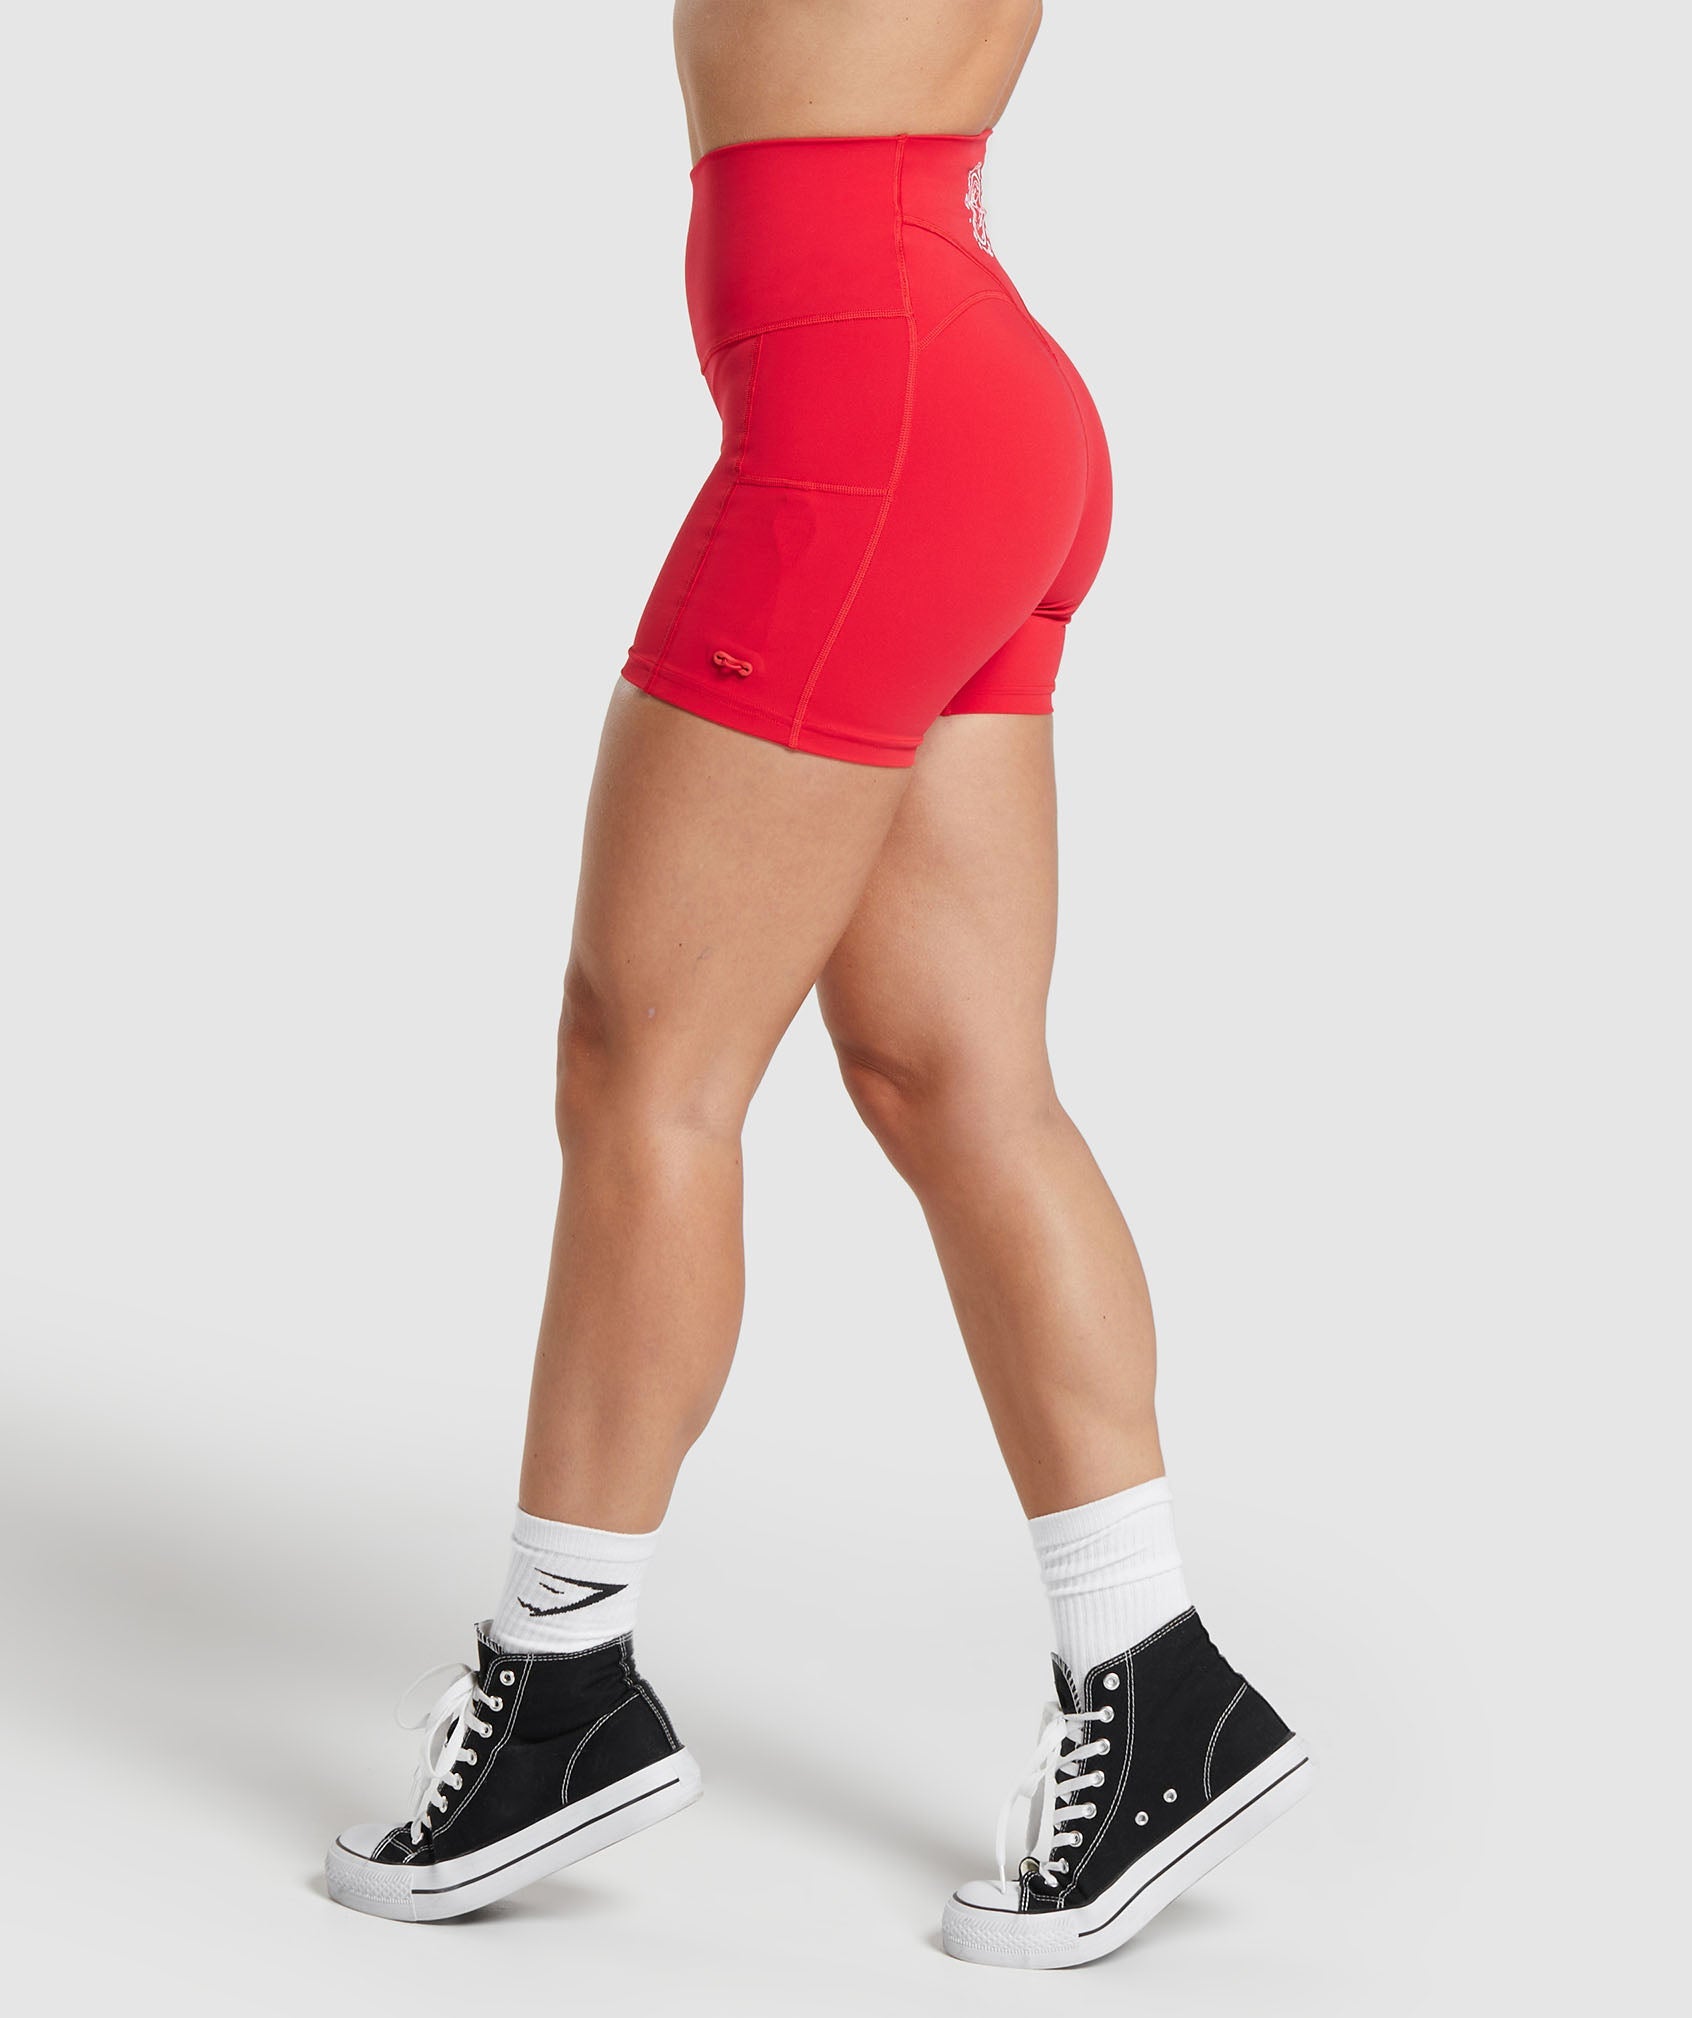 Legacy Tight Shorts in Jamz Red - view 3